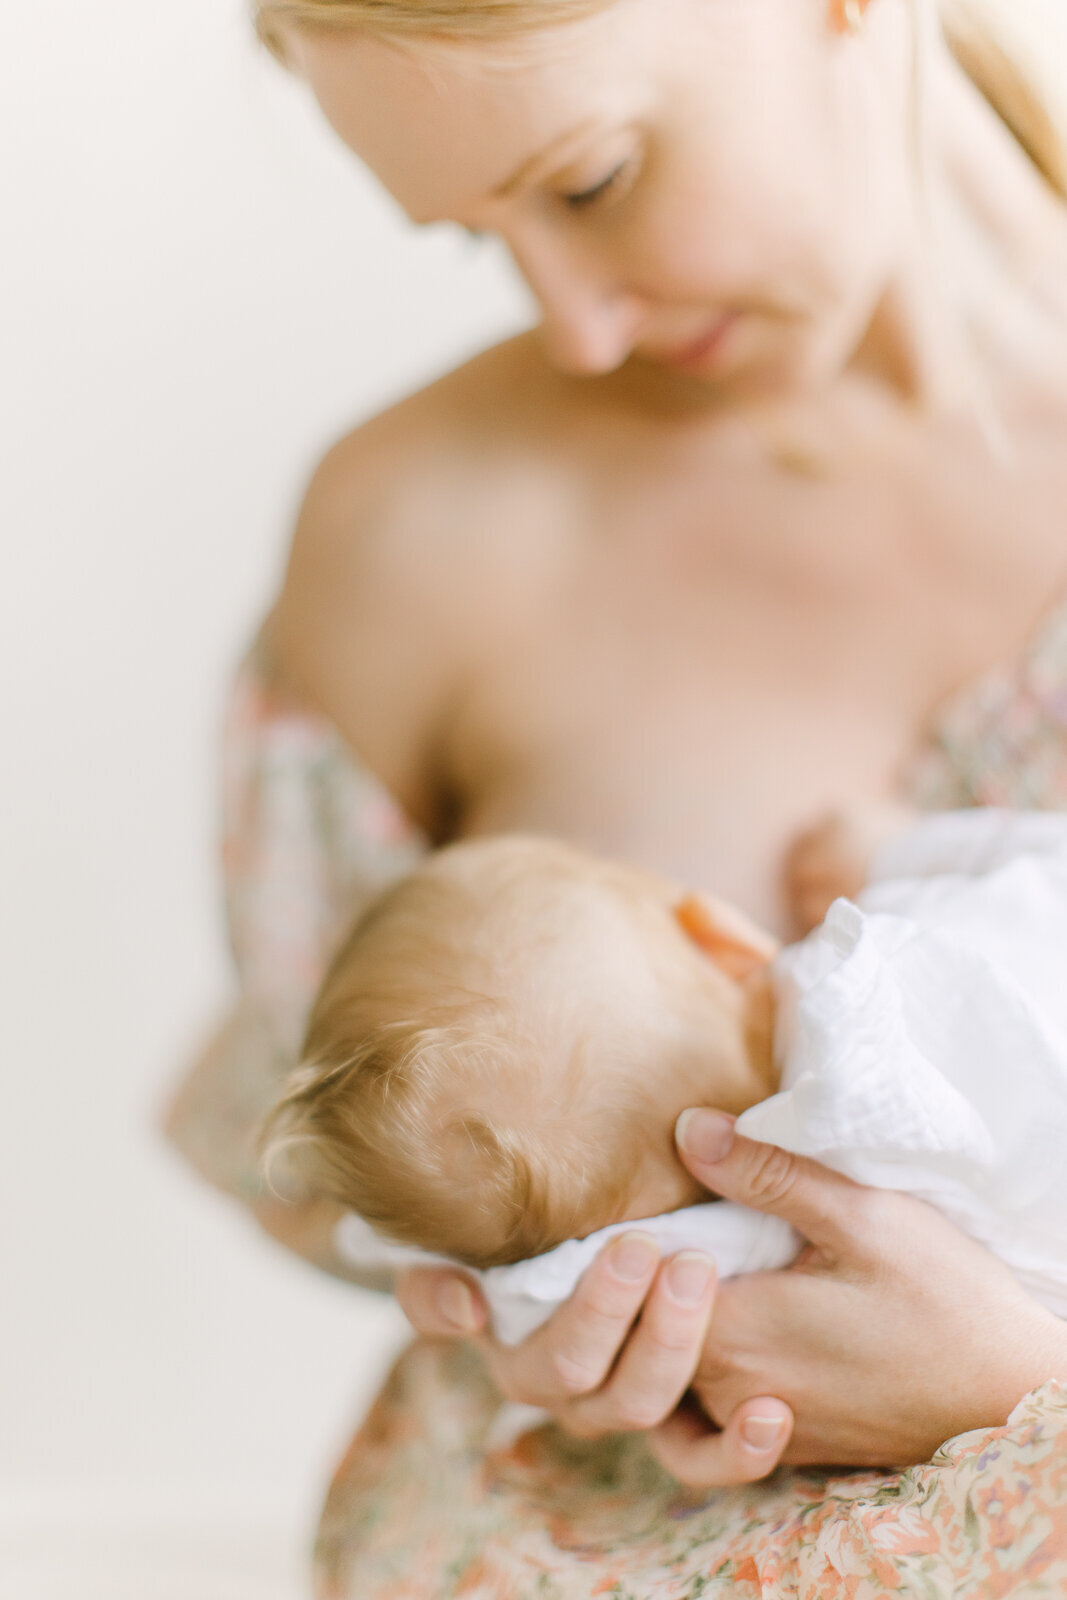 A close up image focusing on an infant's head while his mother breastfeeds him during photo session with Boston family photographer Corinne Isabelle